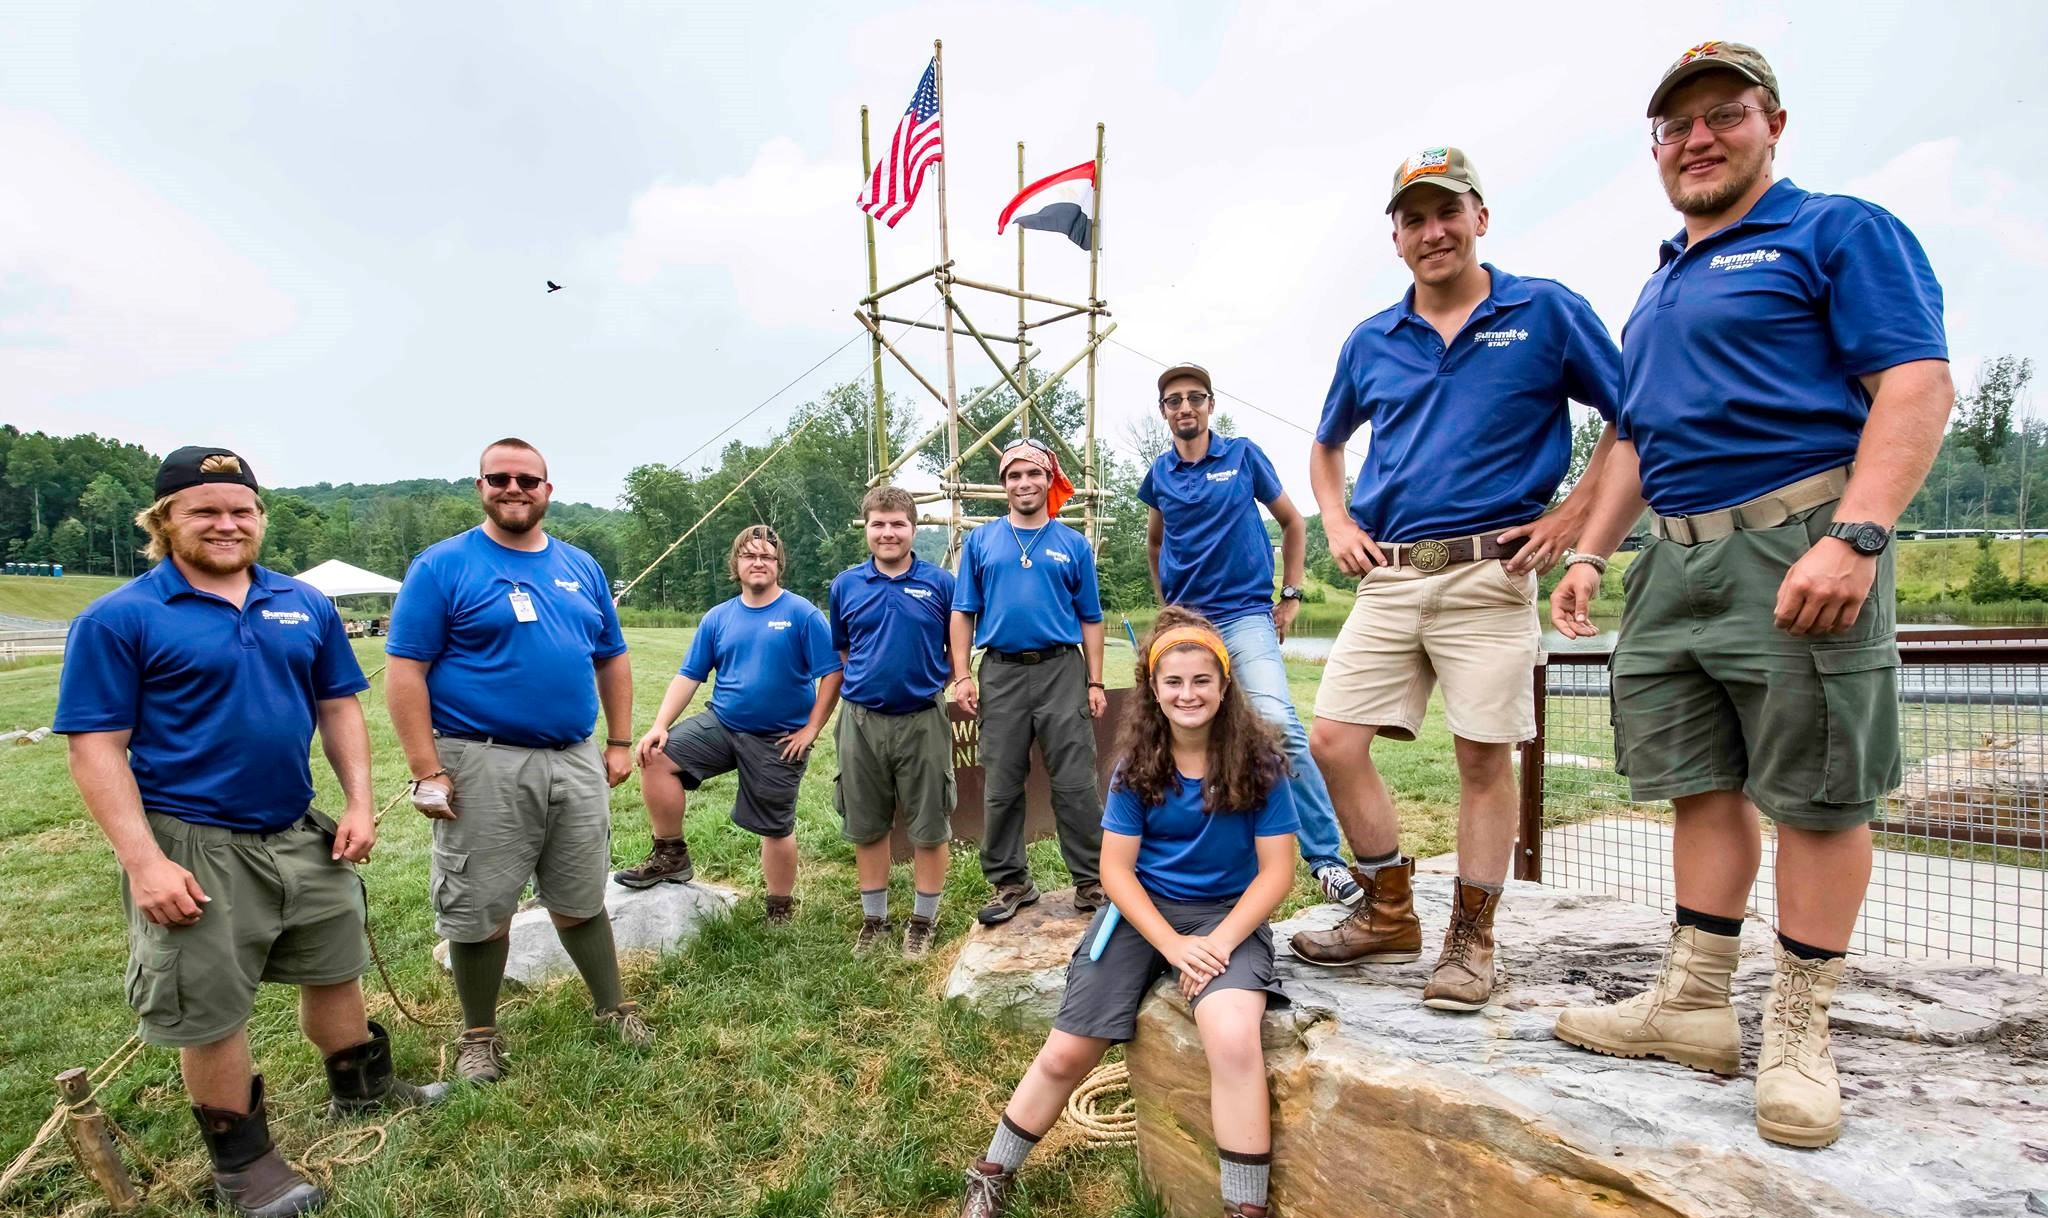 Everything you need to know about working at a high-adventure base or BSA camp